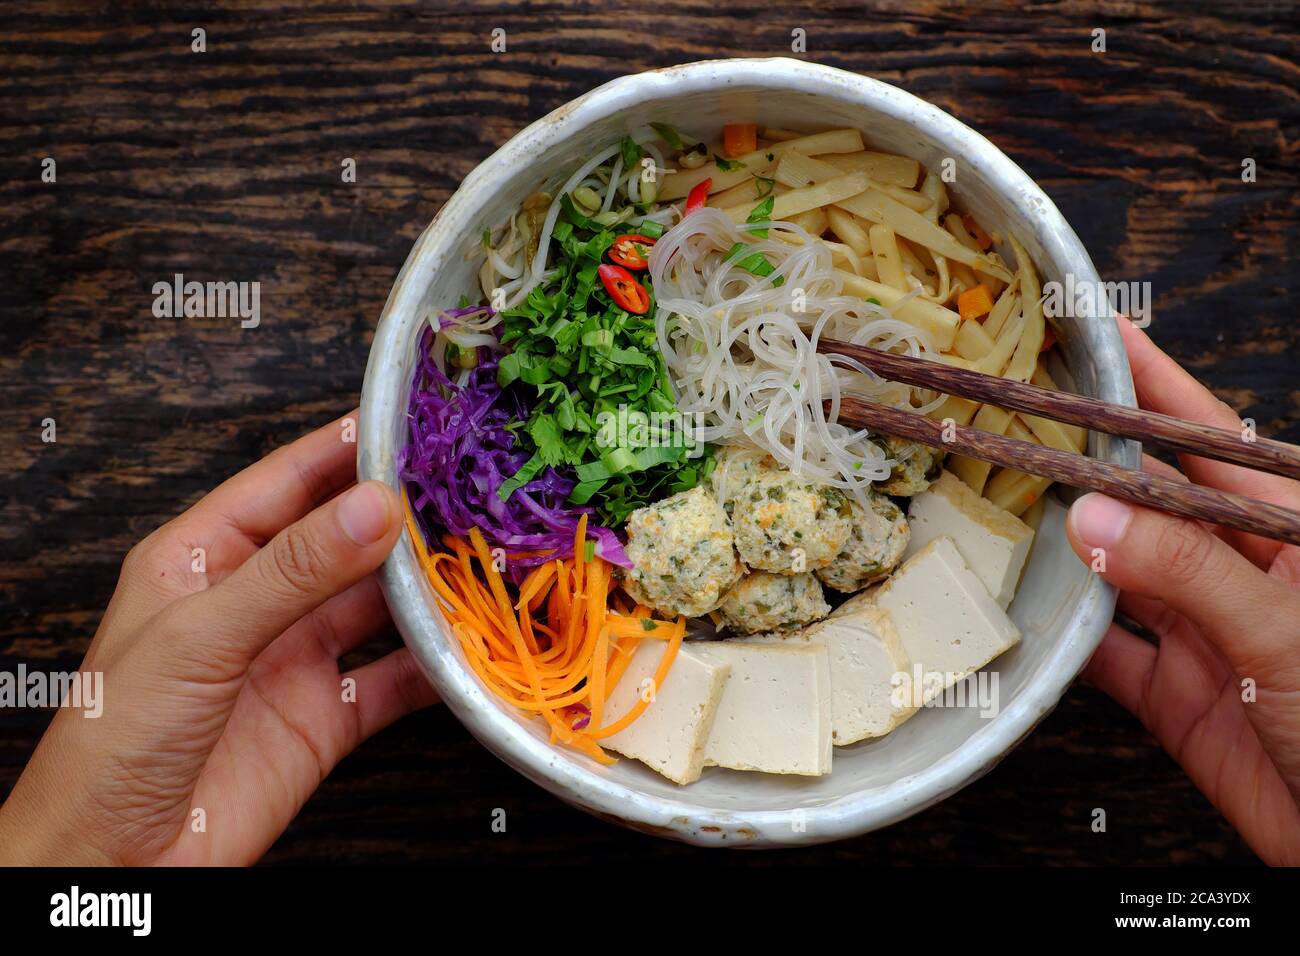 Homemade Vietnamese vegan noodles soup with vegetables as carrot, violet cabbage,tofu sliced, balls,delicious, nutrition, healthy vegetarian dish bowl Stock Photo